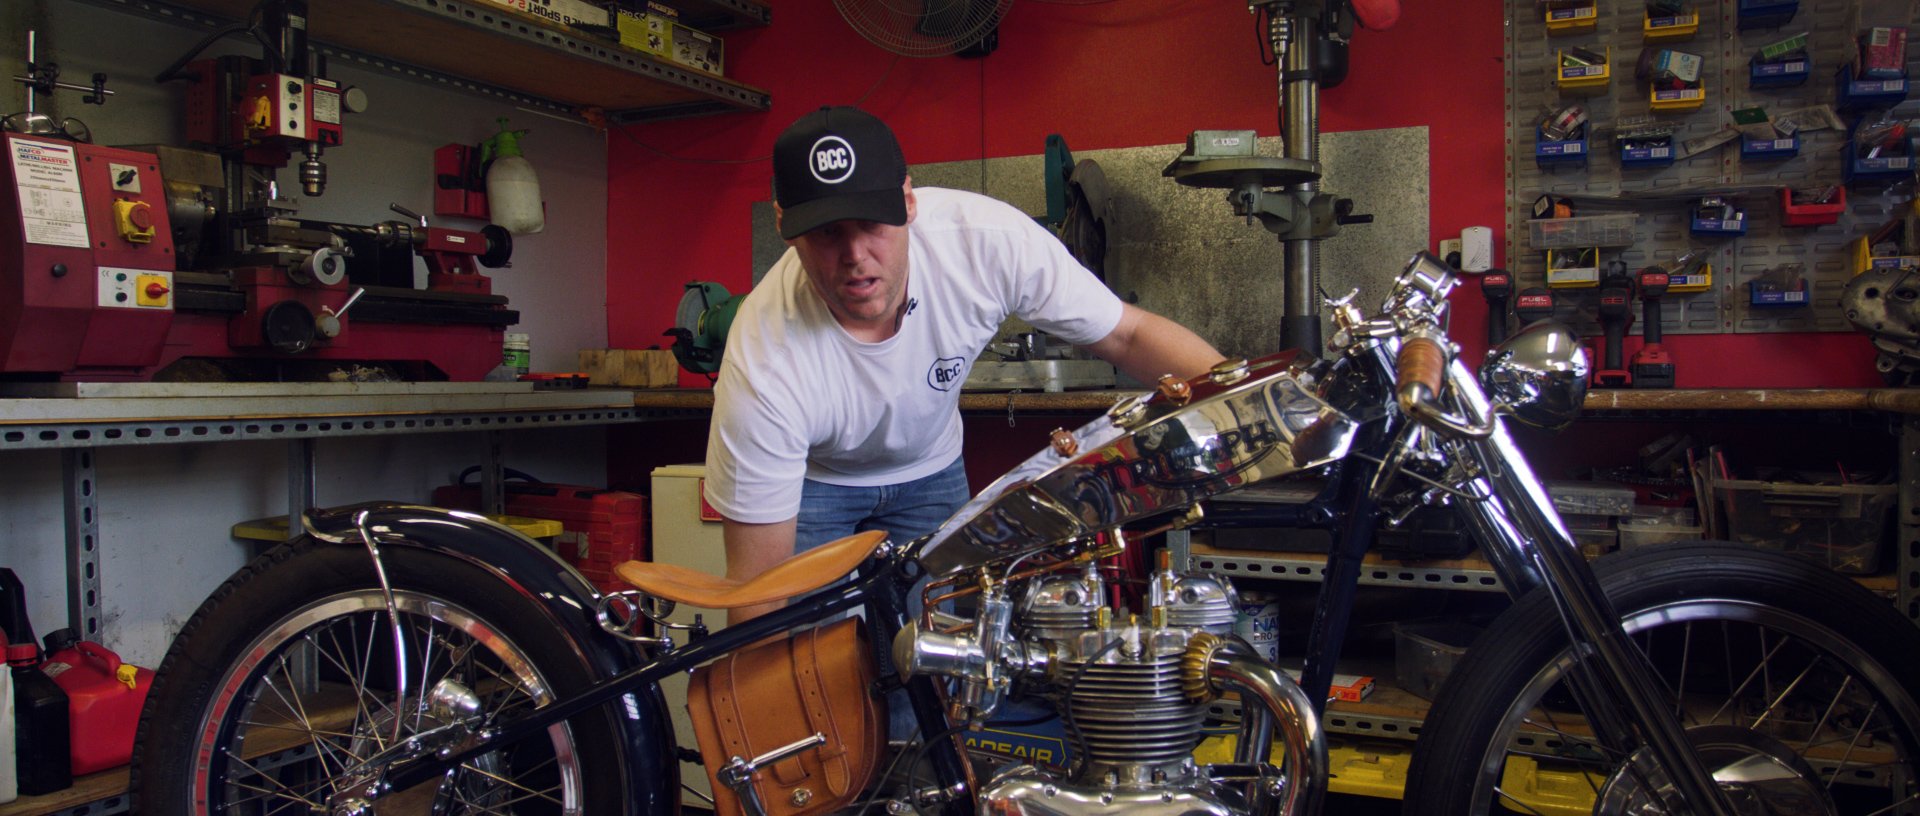 Ian Don- Black Cat Customs: Handcrafted Motorcycle Documentary